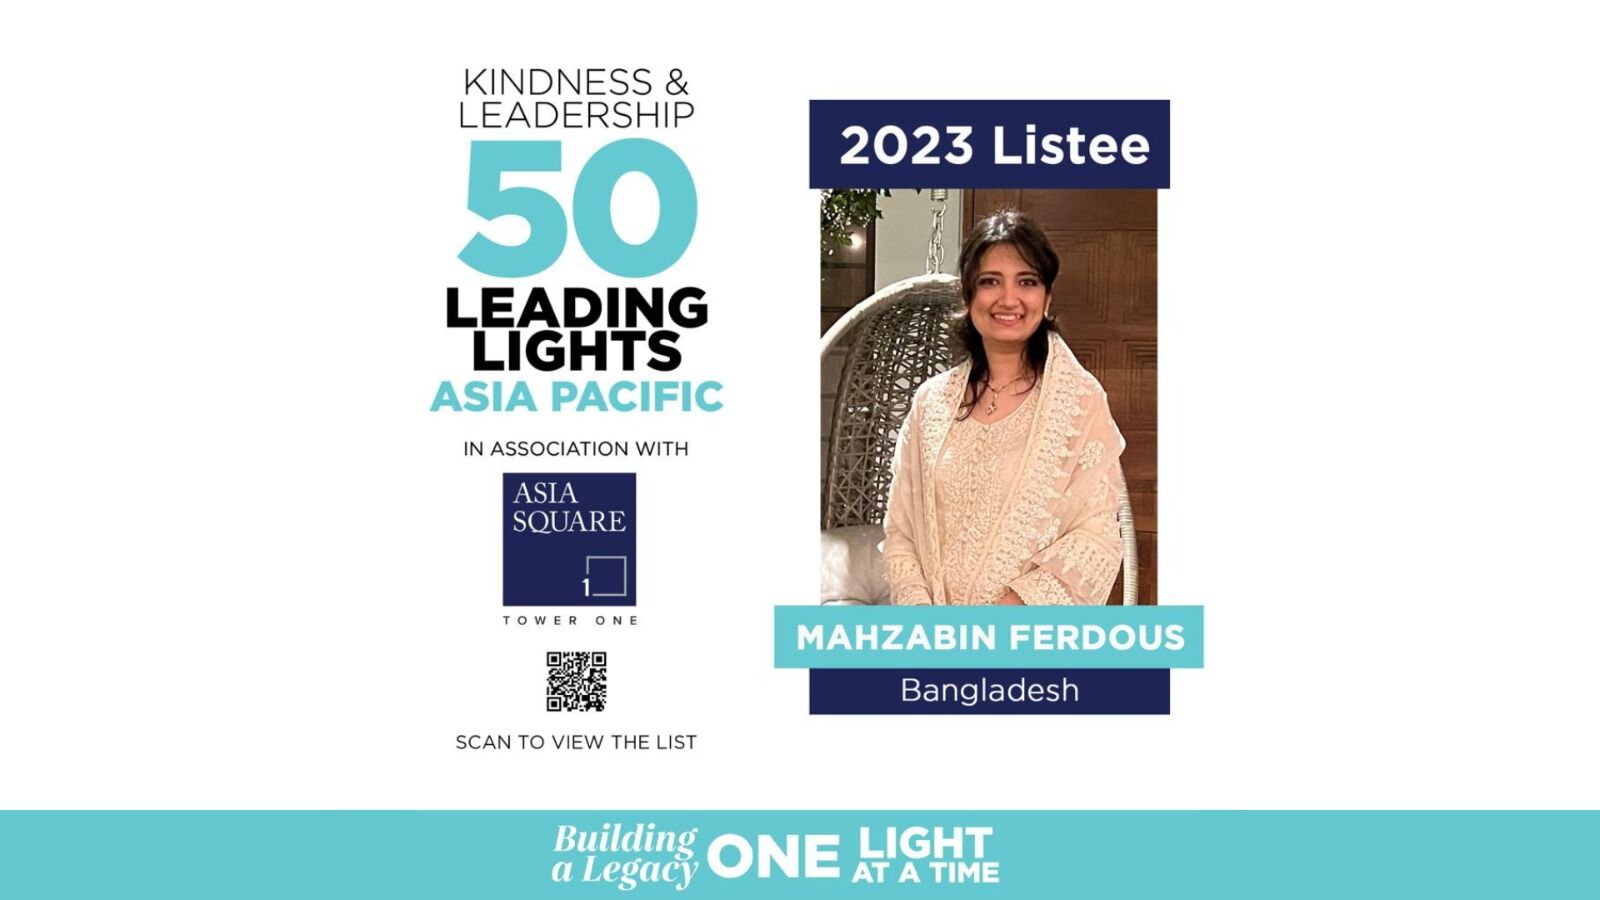 Mahzabin From Bangladesh Made It To Asia's Kindness List 2023-Markedium